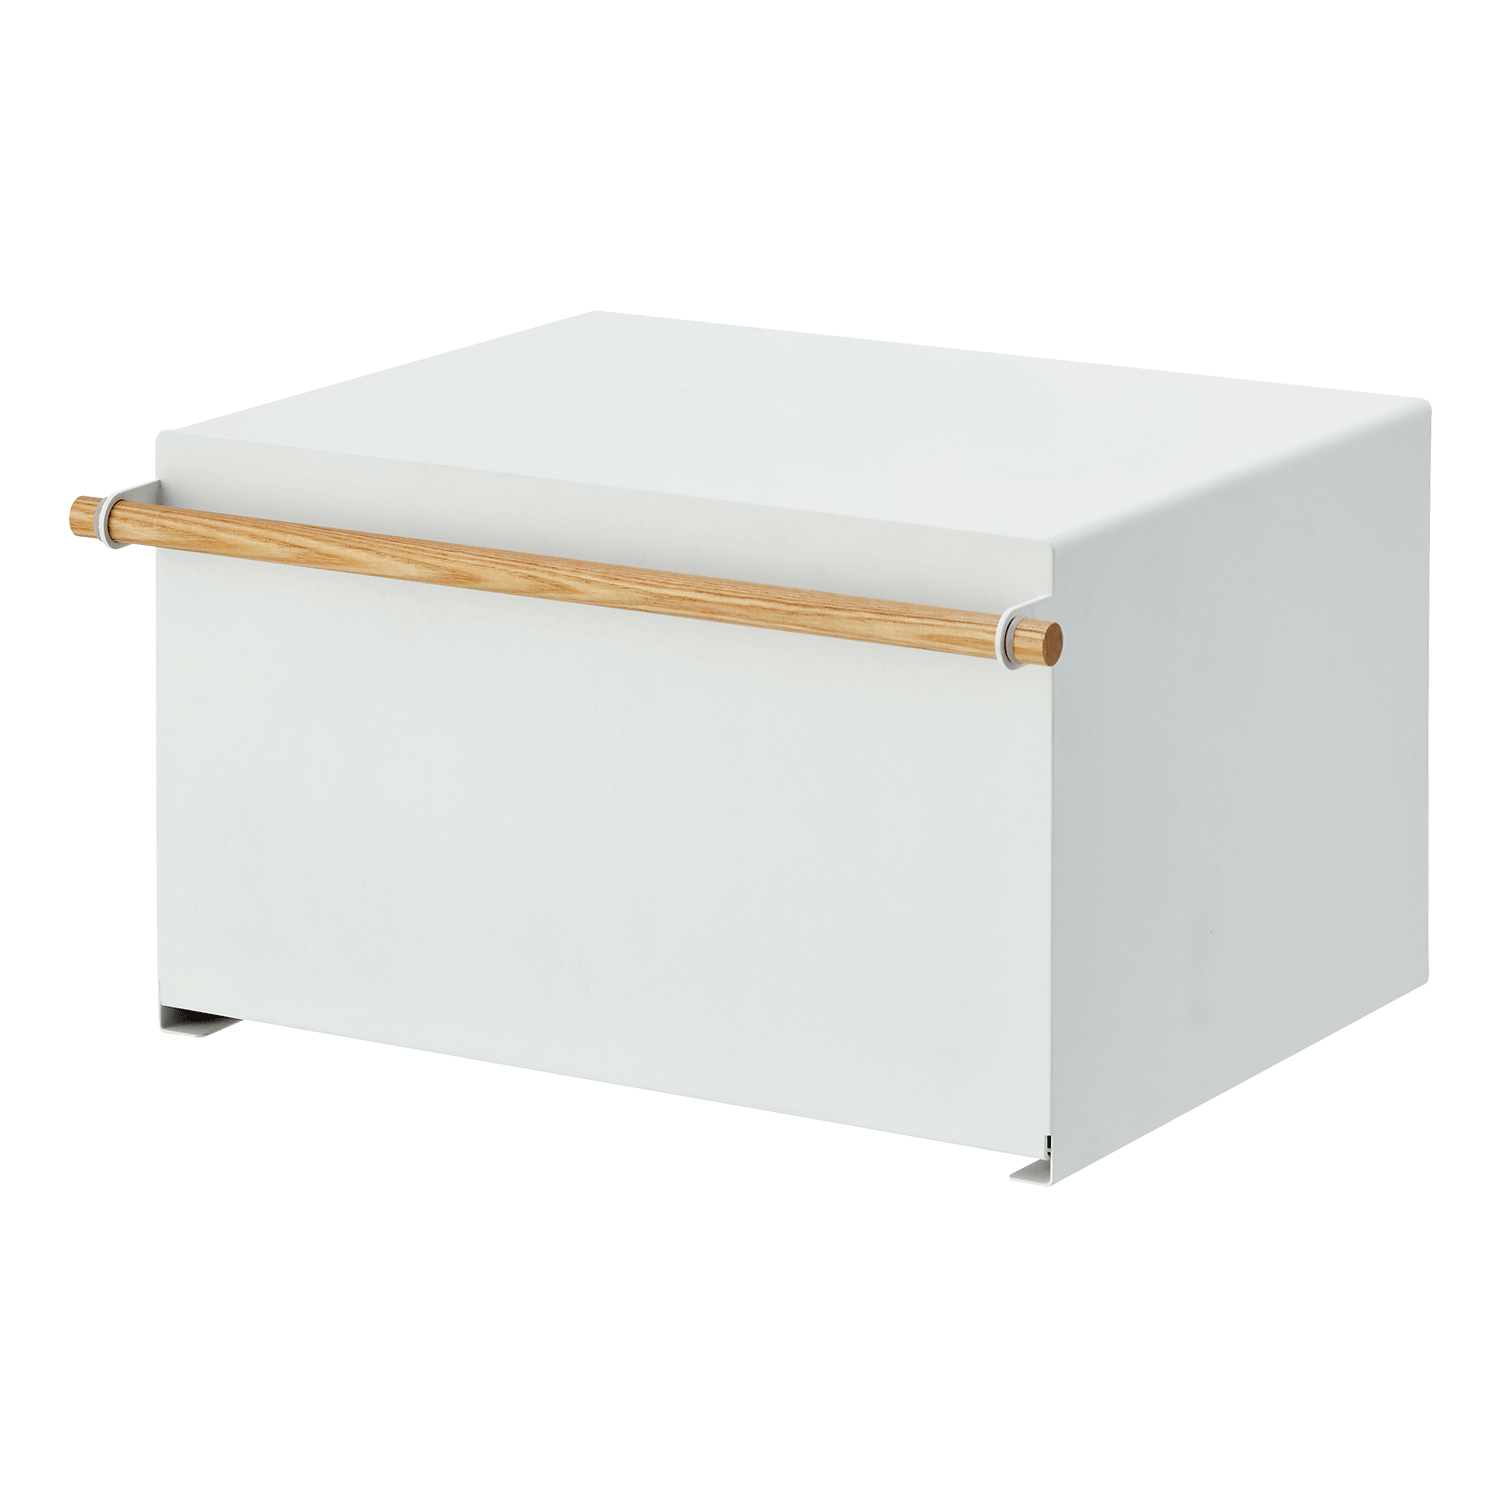 Metal Container Storage Holder Bread Box with Wooden Lid - China